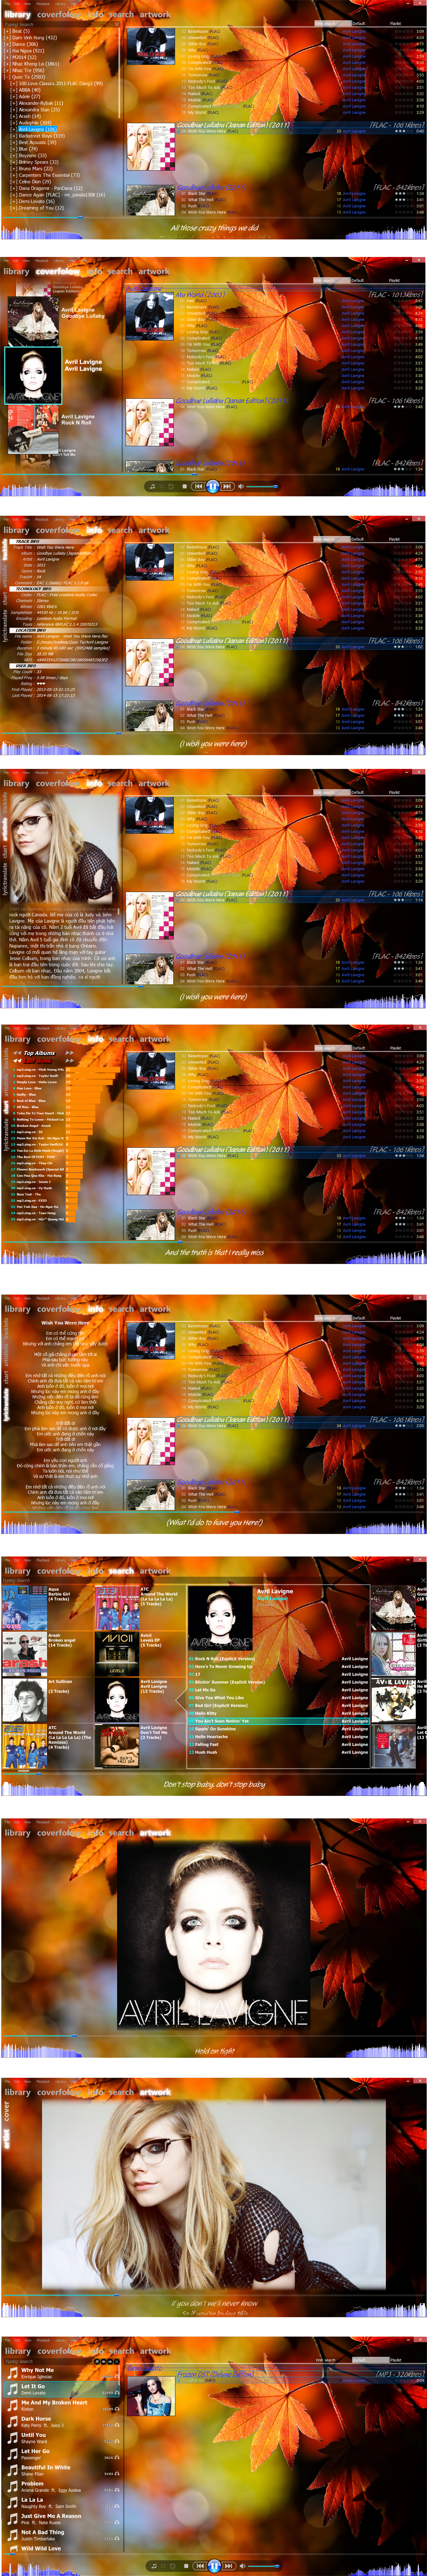 my_skin_foobar_preview__by_thanhdat1710-d7muk1c.png